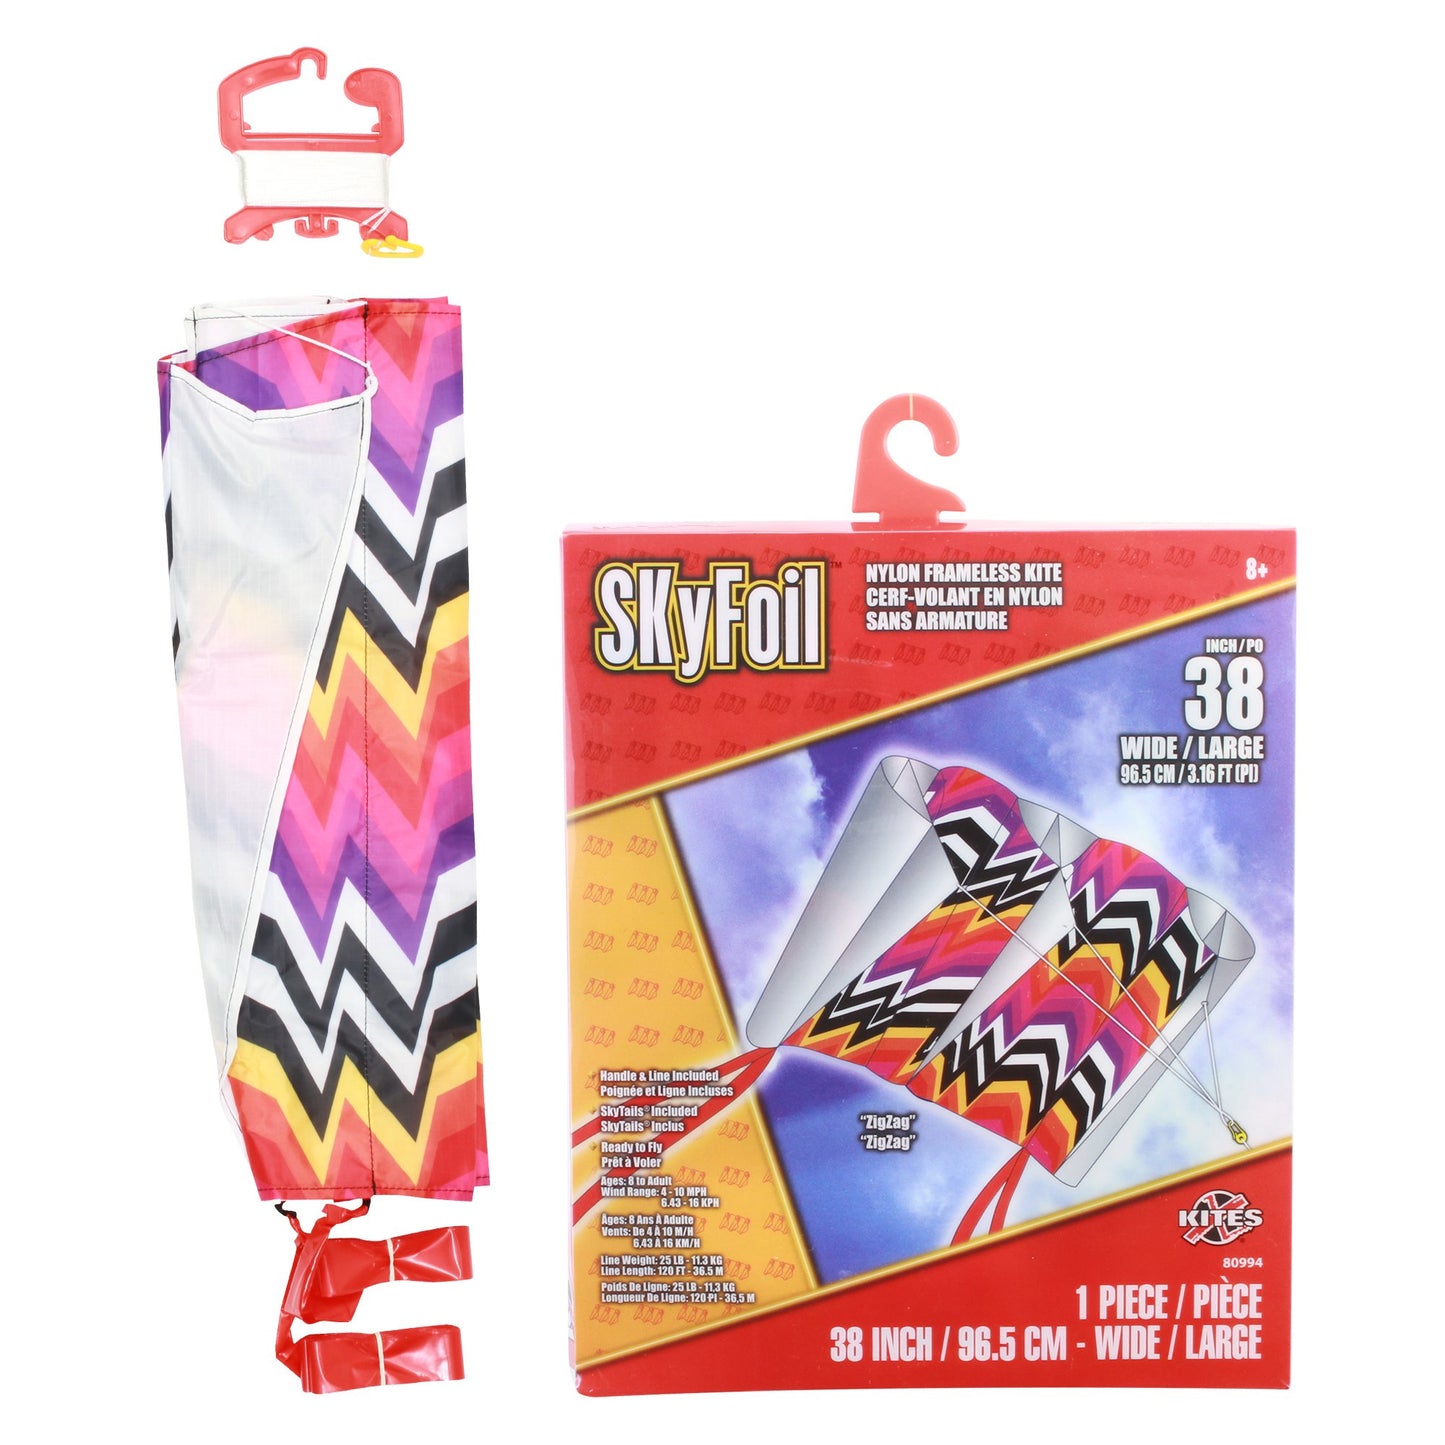 X Kites SkyFoil ZigZag + Pocket Kite Isometric Parafoil Kite Bundle - No Assembly Required Product Image